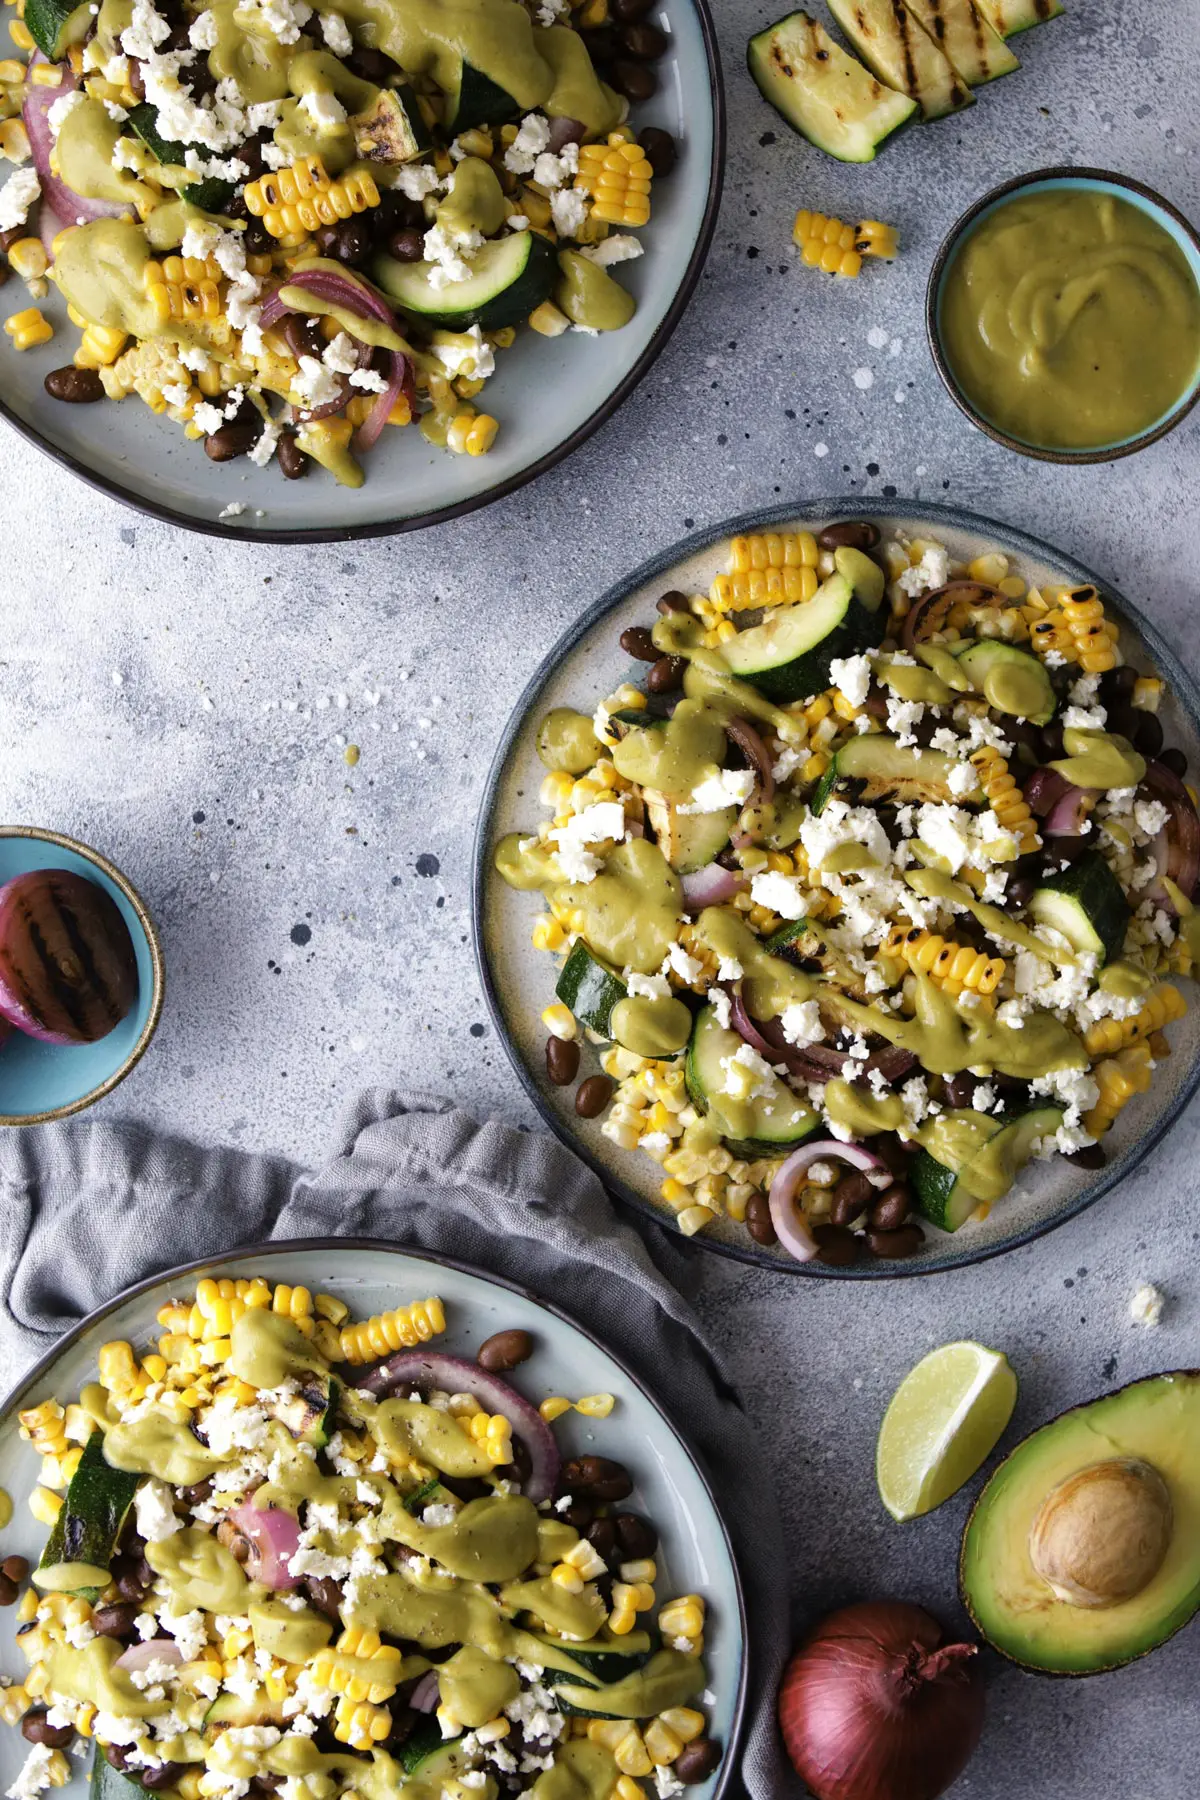 Grilled Zucchini Corn Salad with Avocado Dressing